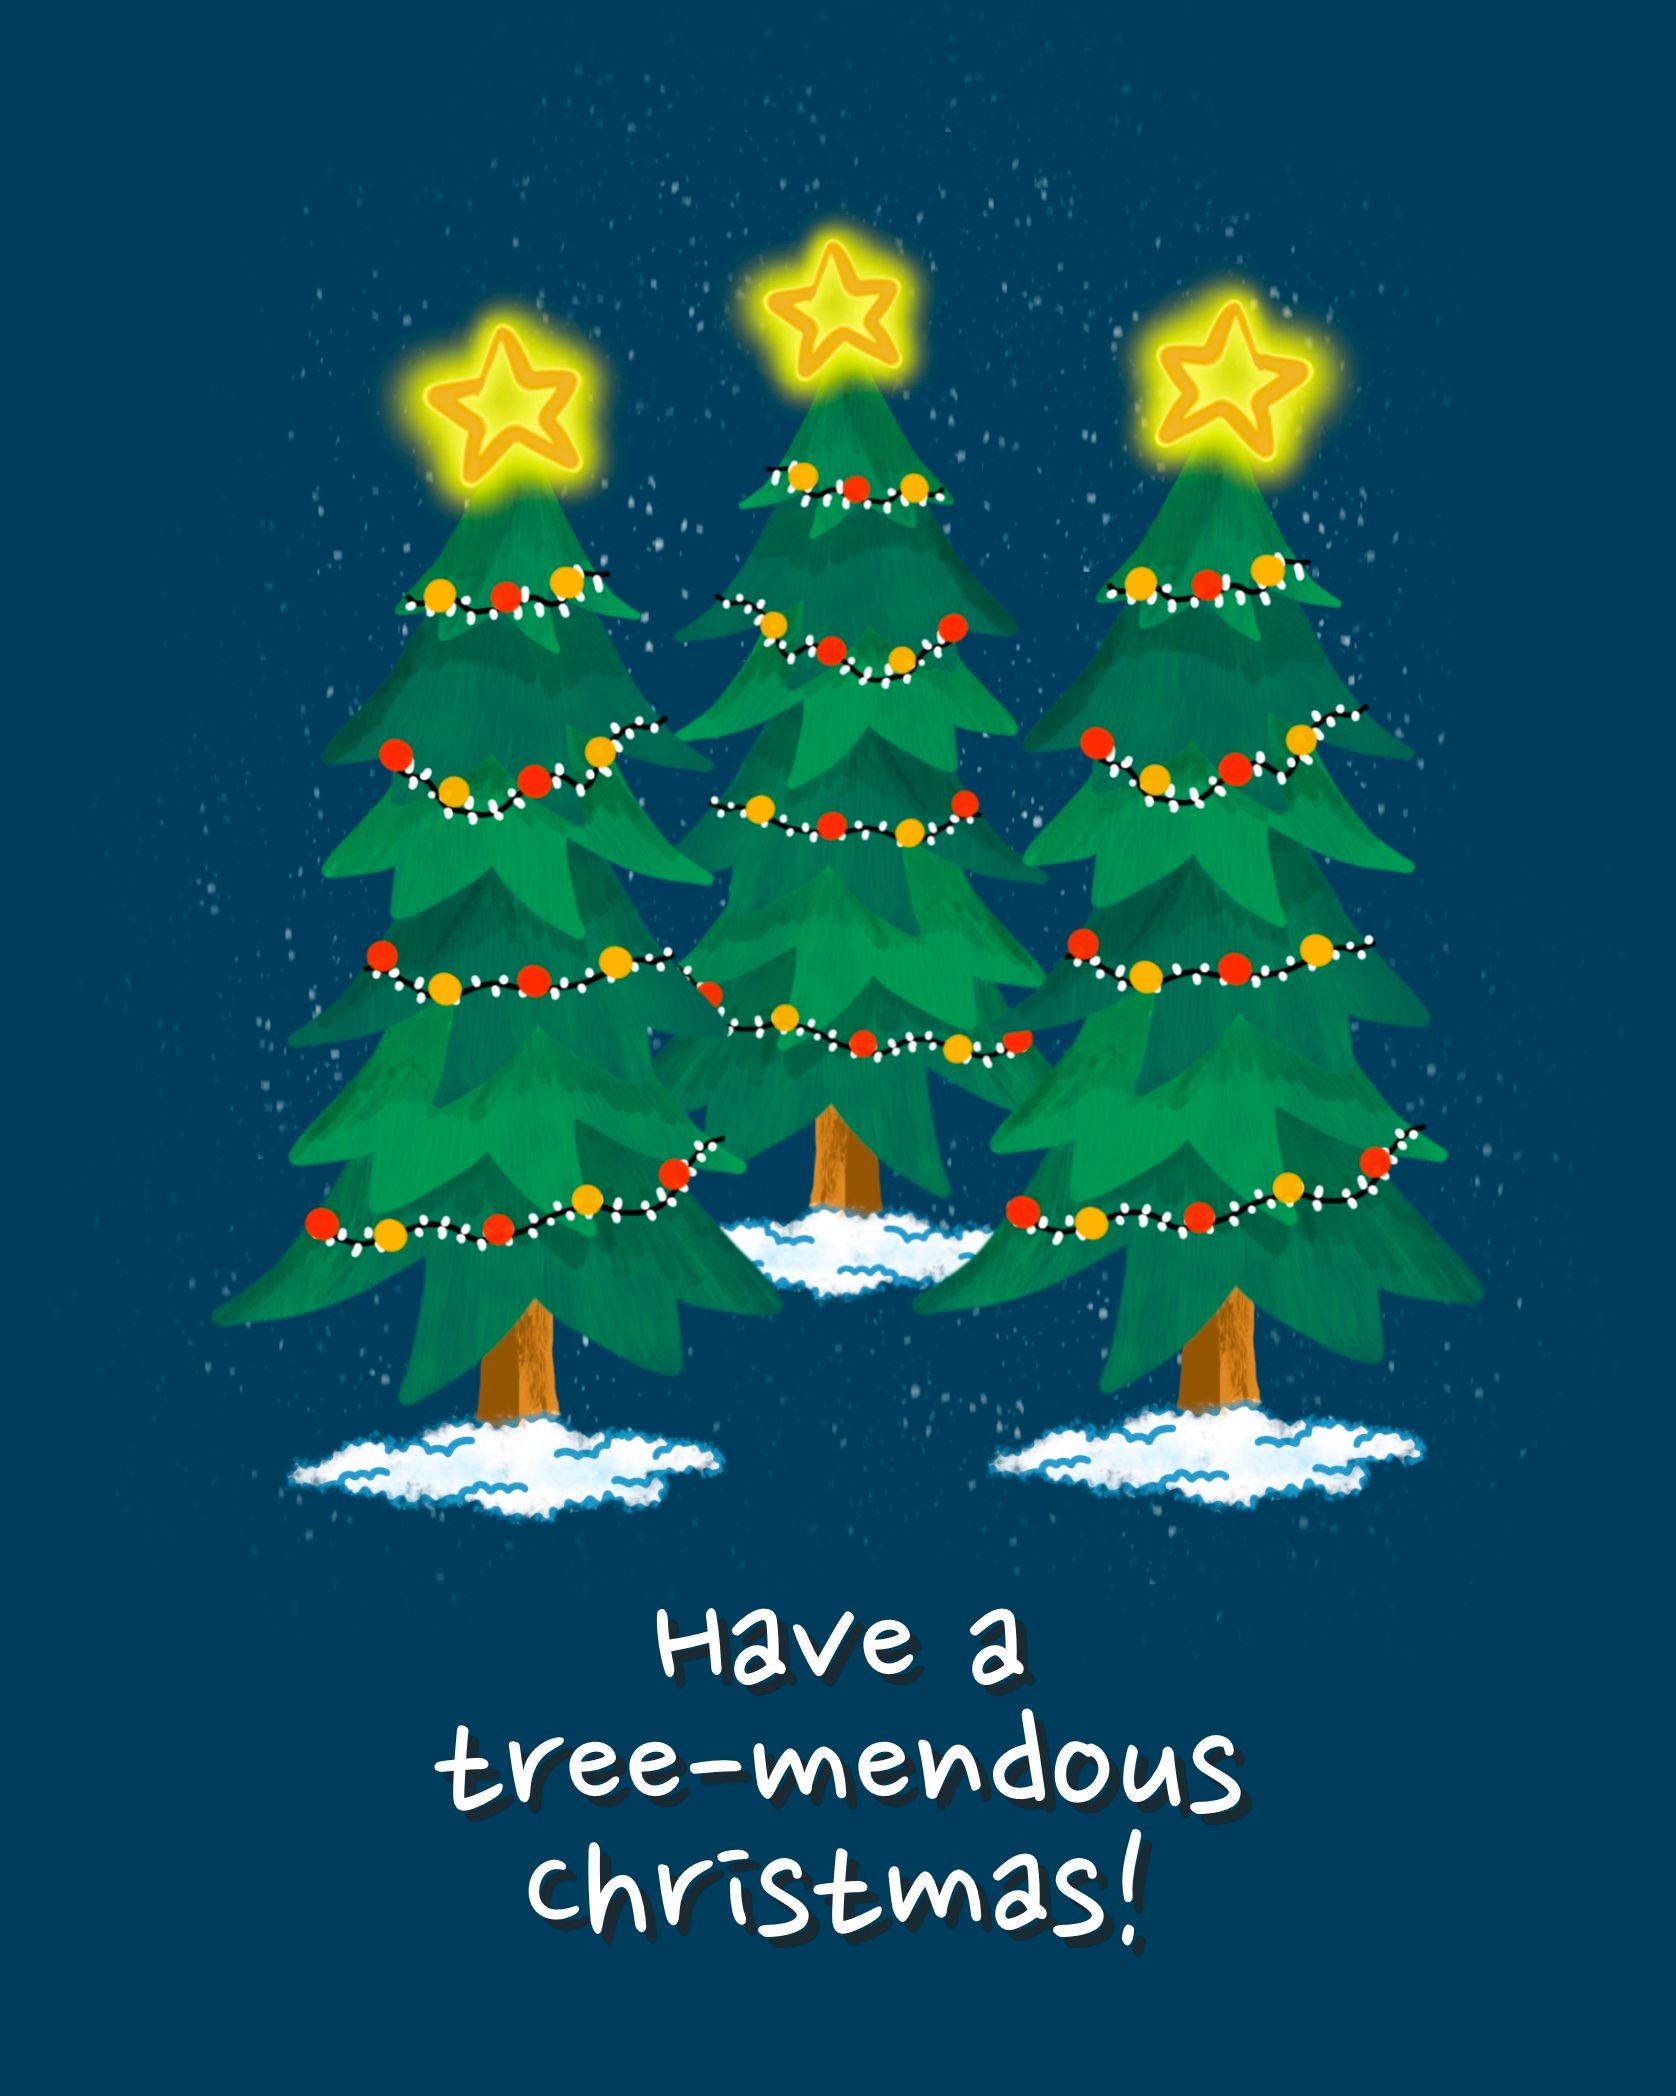 Card design "have a tree-mendous christmas"